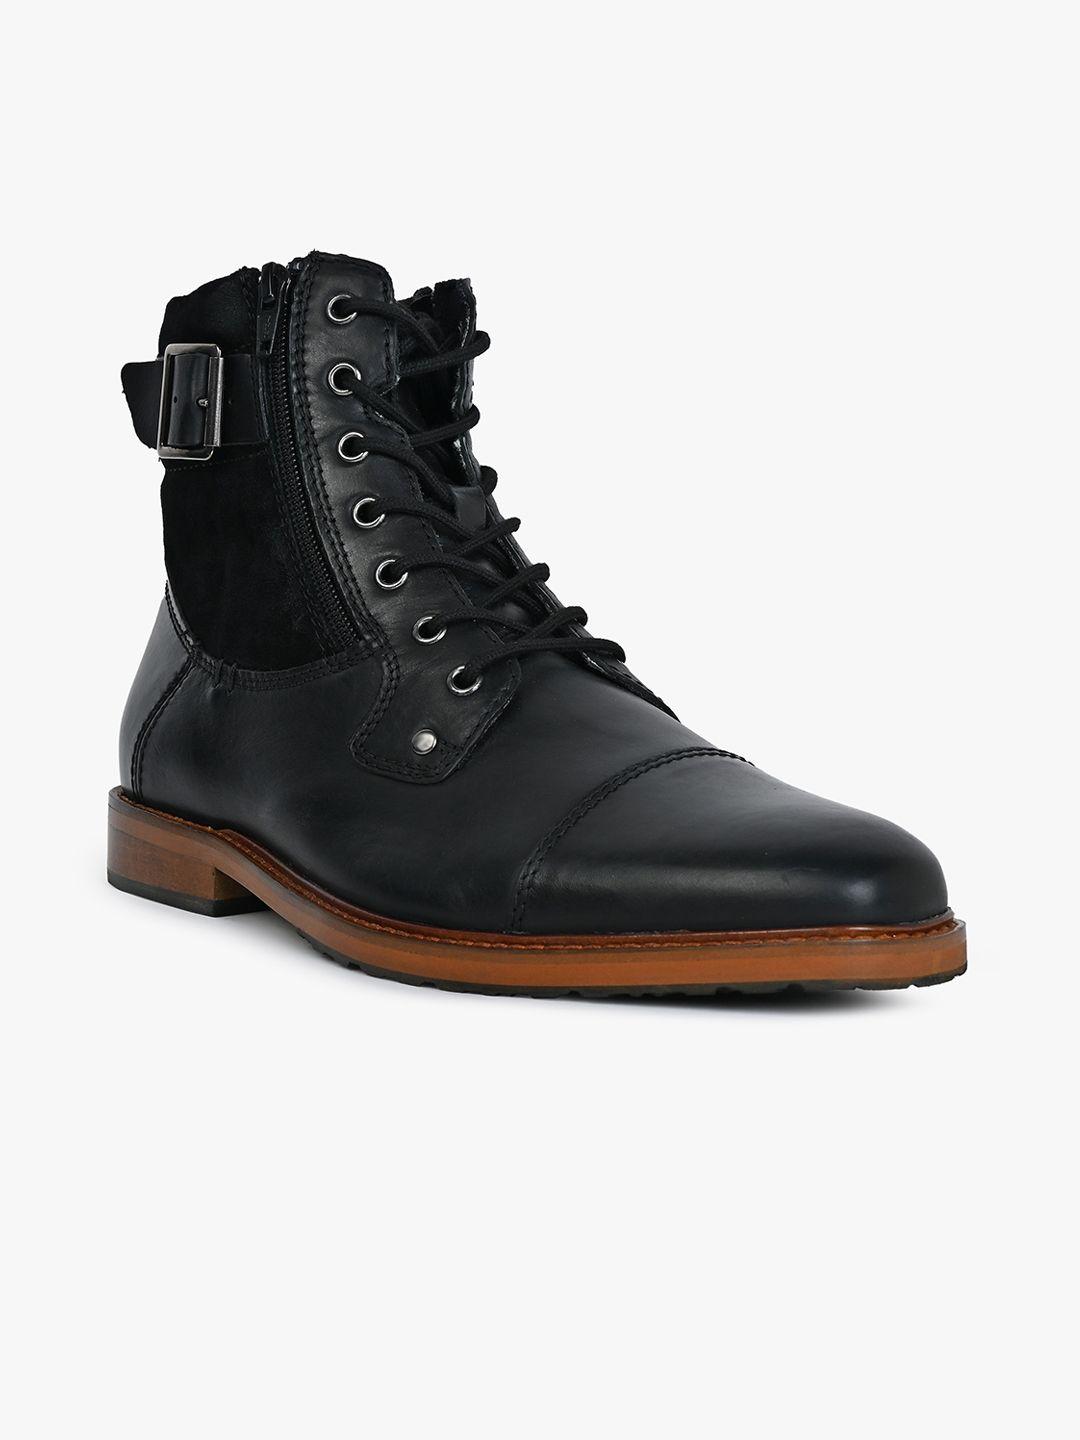 aldo men mid top leather regular boots with buckle detail